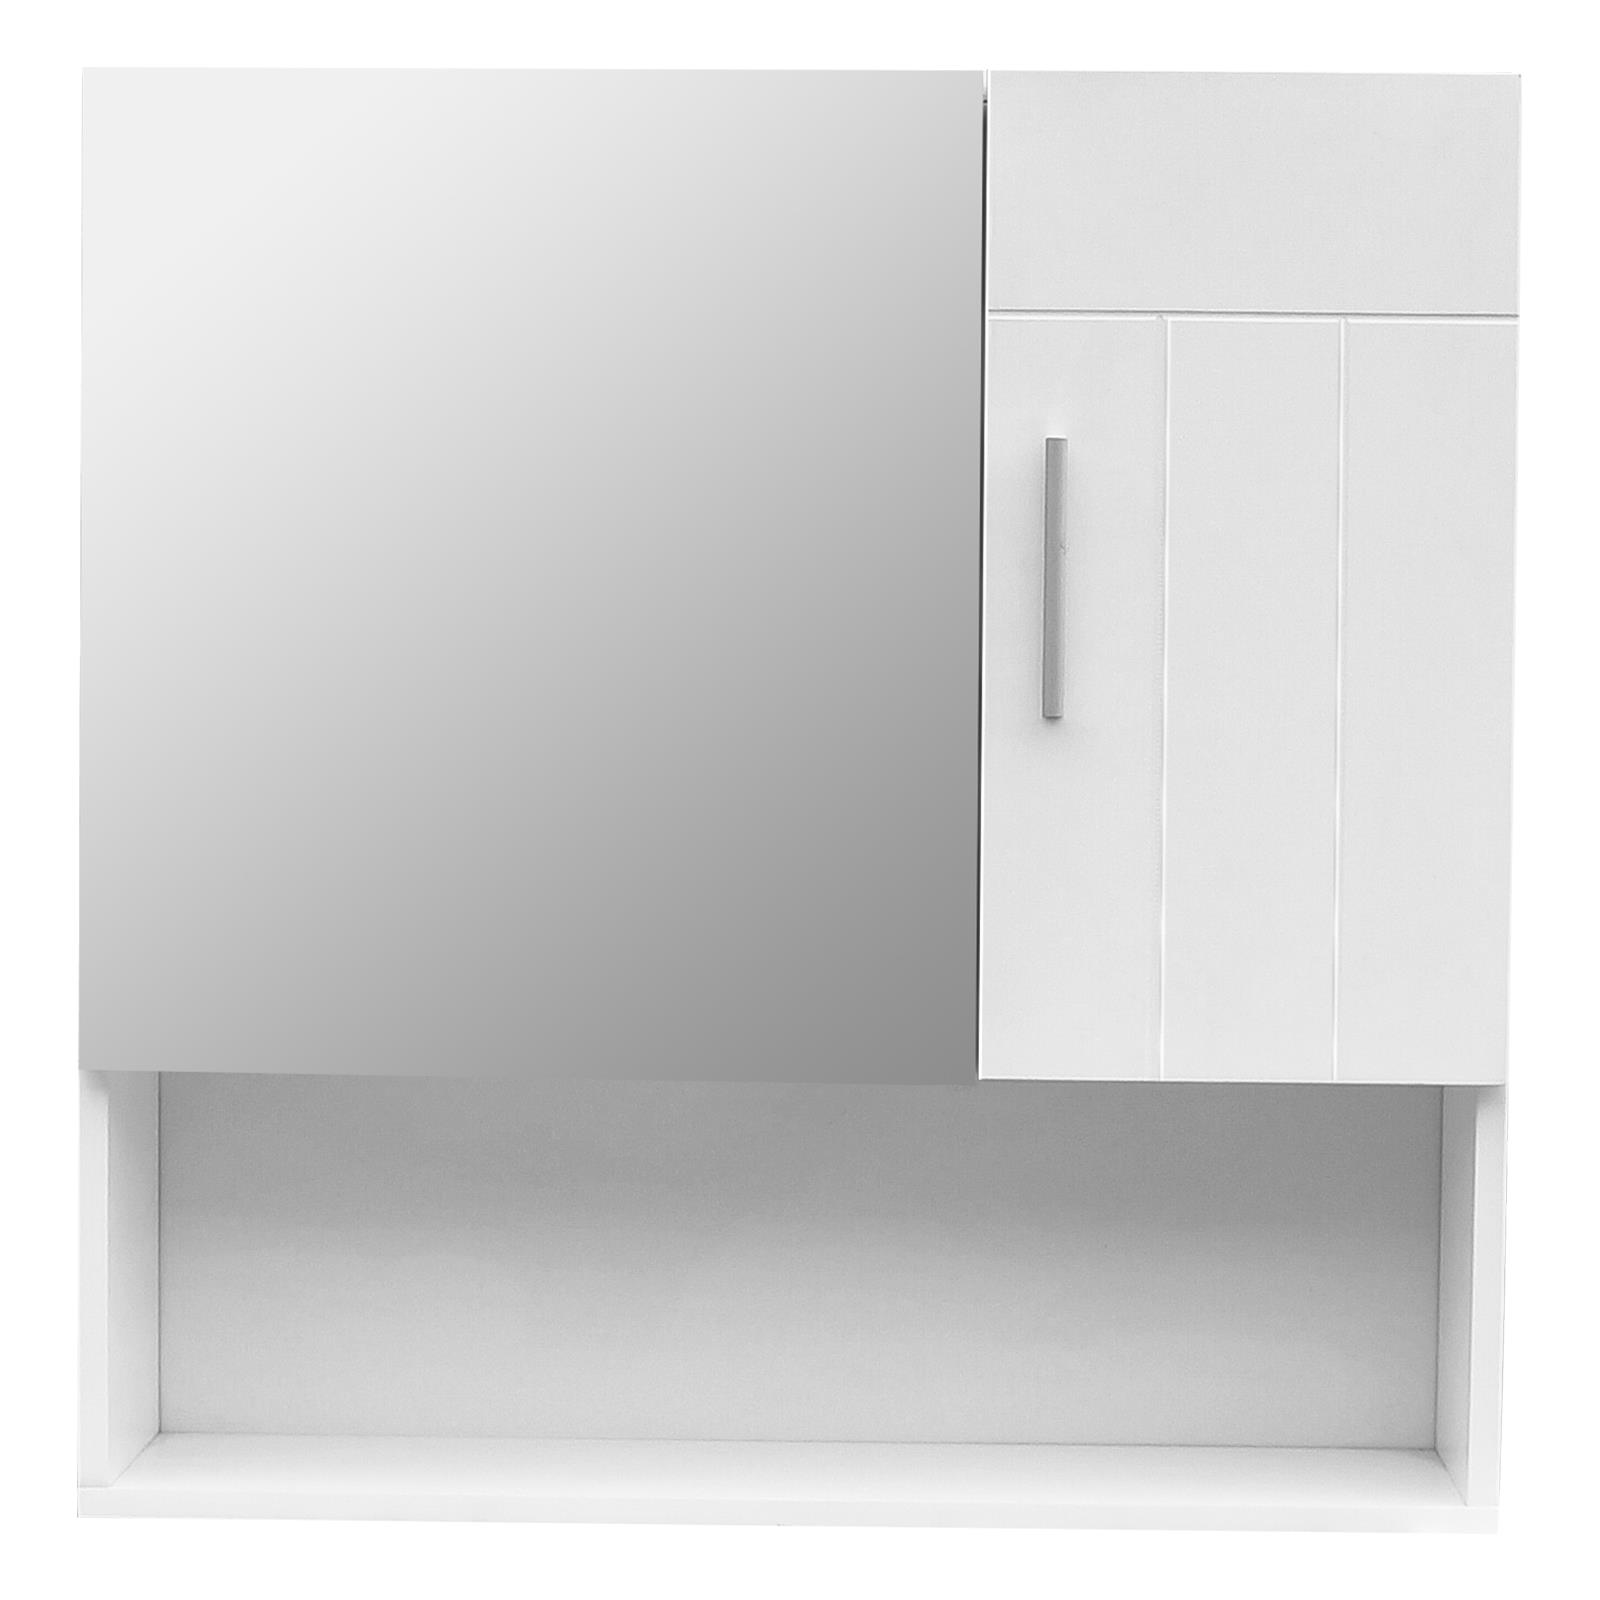 SalonMore Mirror Cabinet, Mirrored Storage Wall Cabinet, Wall Mounted Medicine Cabinet with Mirror Doors & Shelf Bathroom White - image 4 of 5